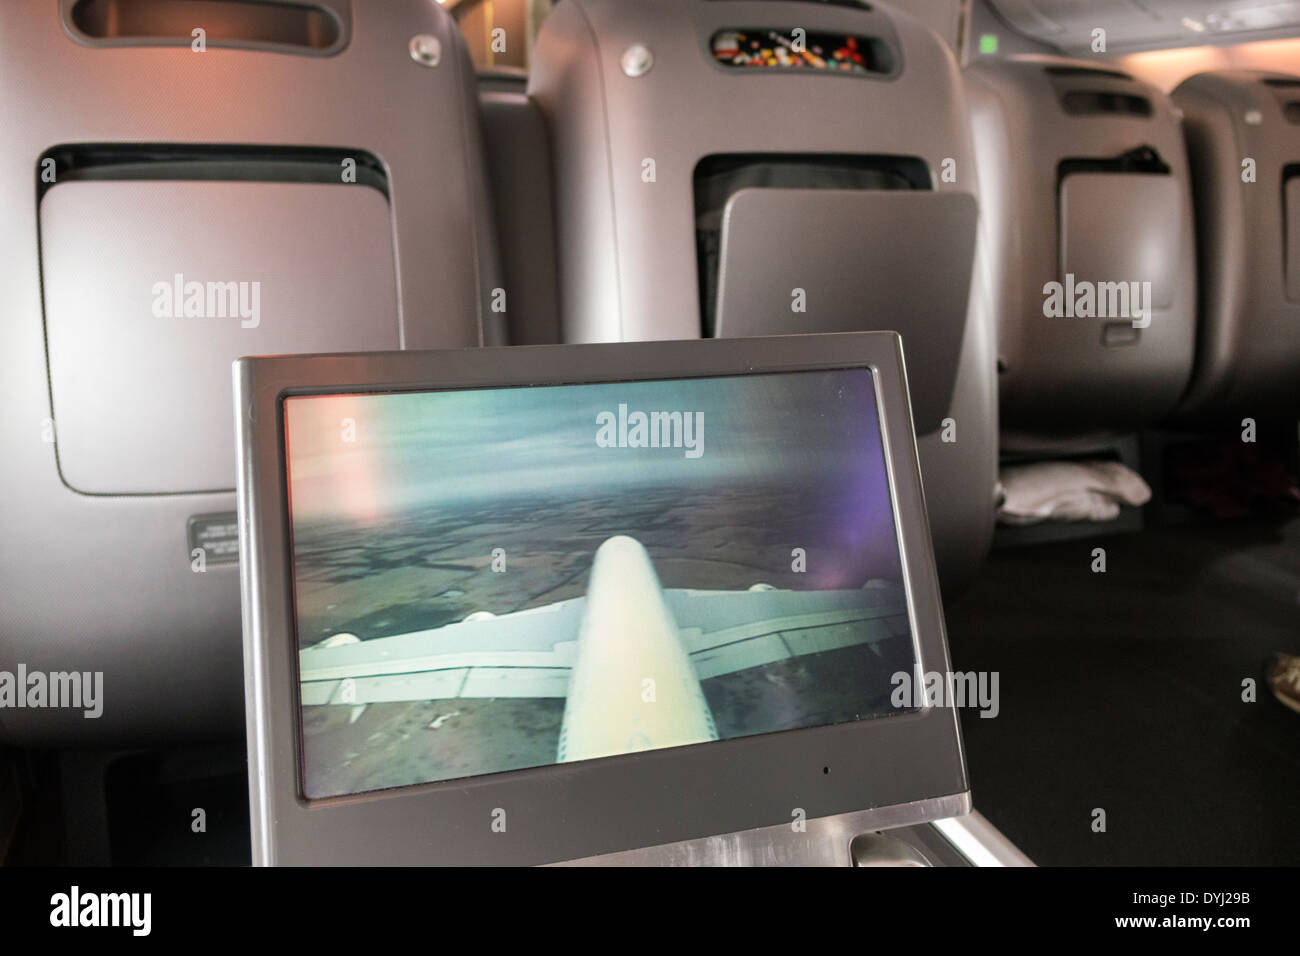 Melbourne Australia,Victoria Qantas,airlines,onboard,flight,passenger cabin,class,monitor,live view,commercial airliner airplane plane aircraft aeropl Stock Photo